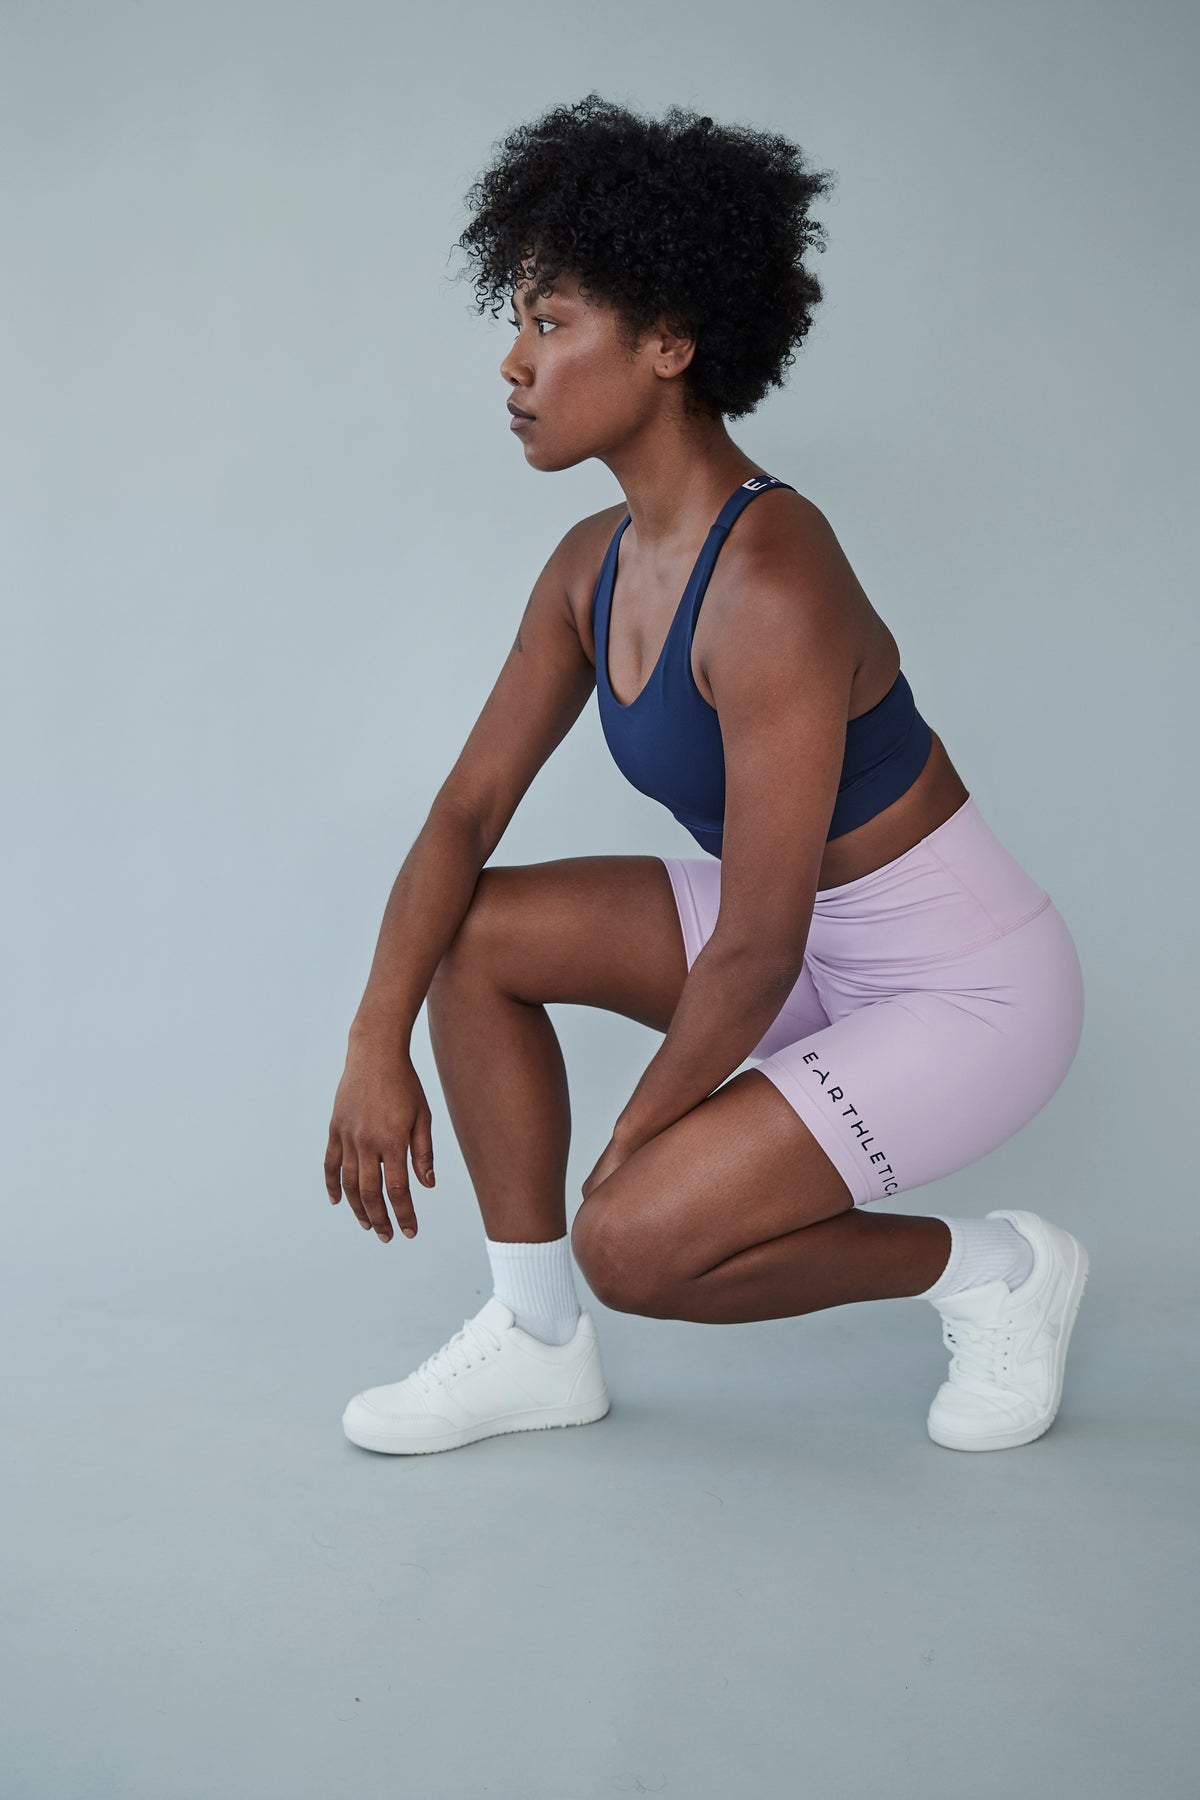 An Earthletica model wearing the Into The Blue crop and Lilac Dreaming bike shorts. She is squatting down on one knee and looking off into the distance.